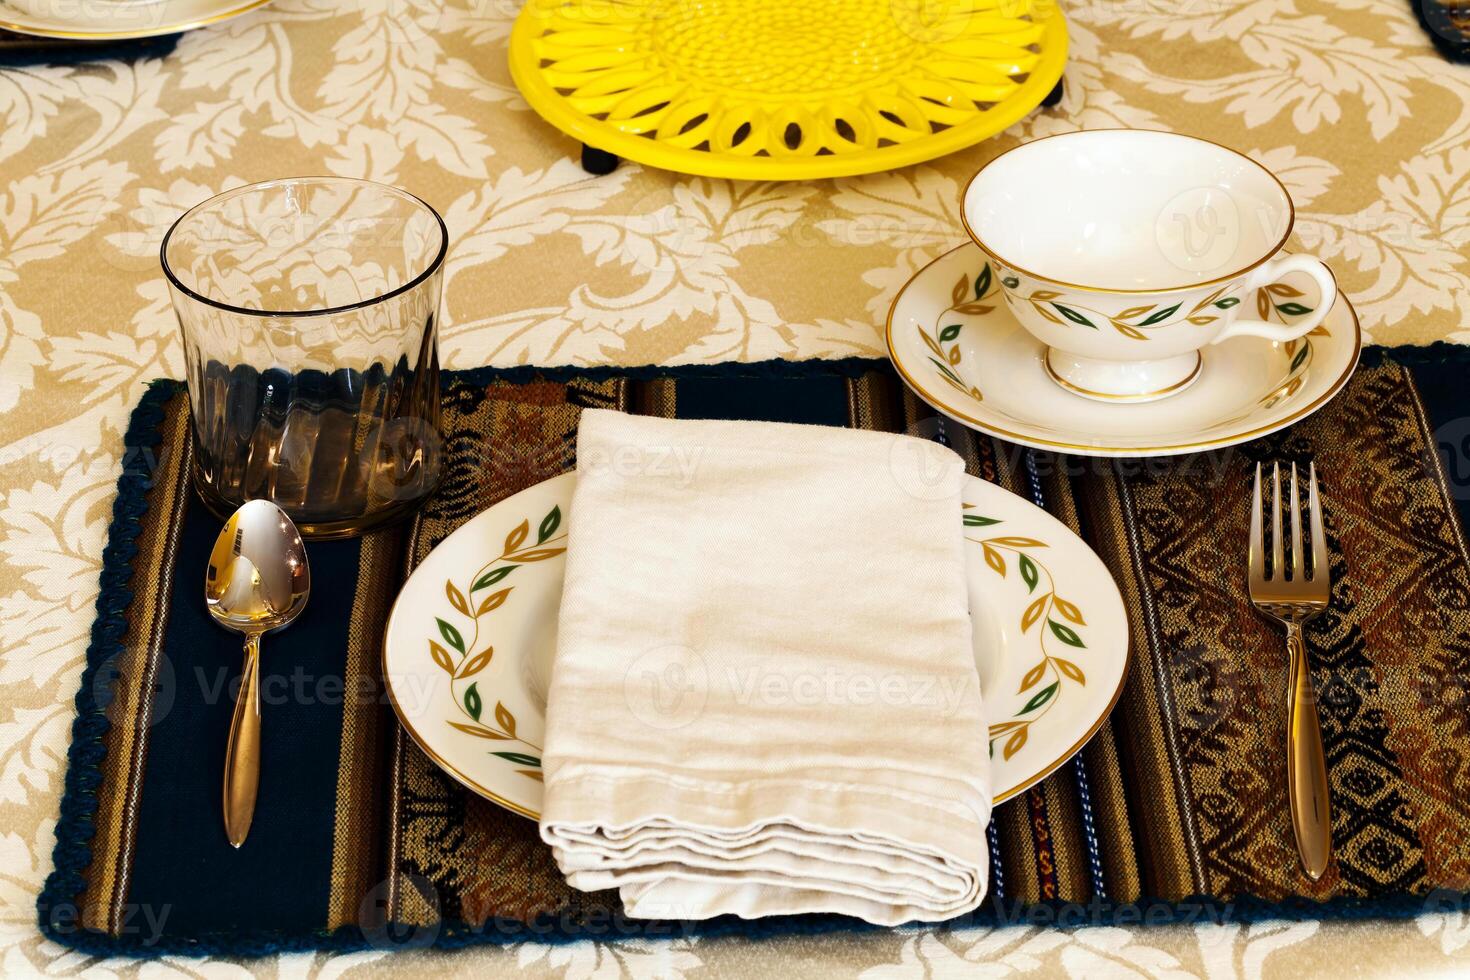 Elegant Table Place Setting For The Holiday Meal photo